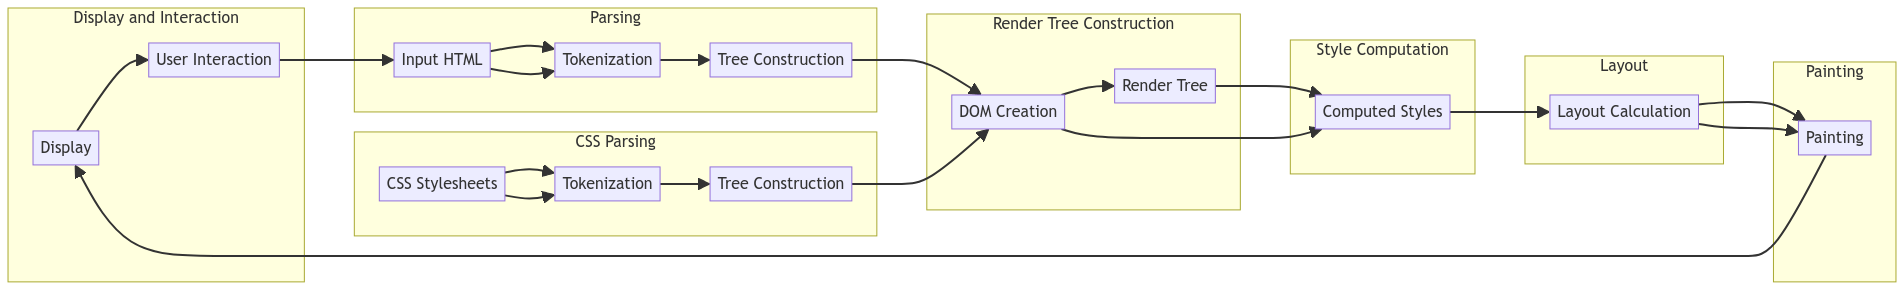 main flow of a rendering engine